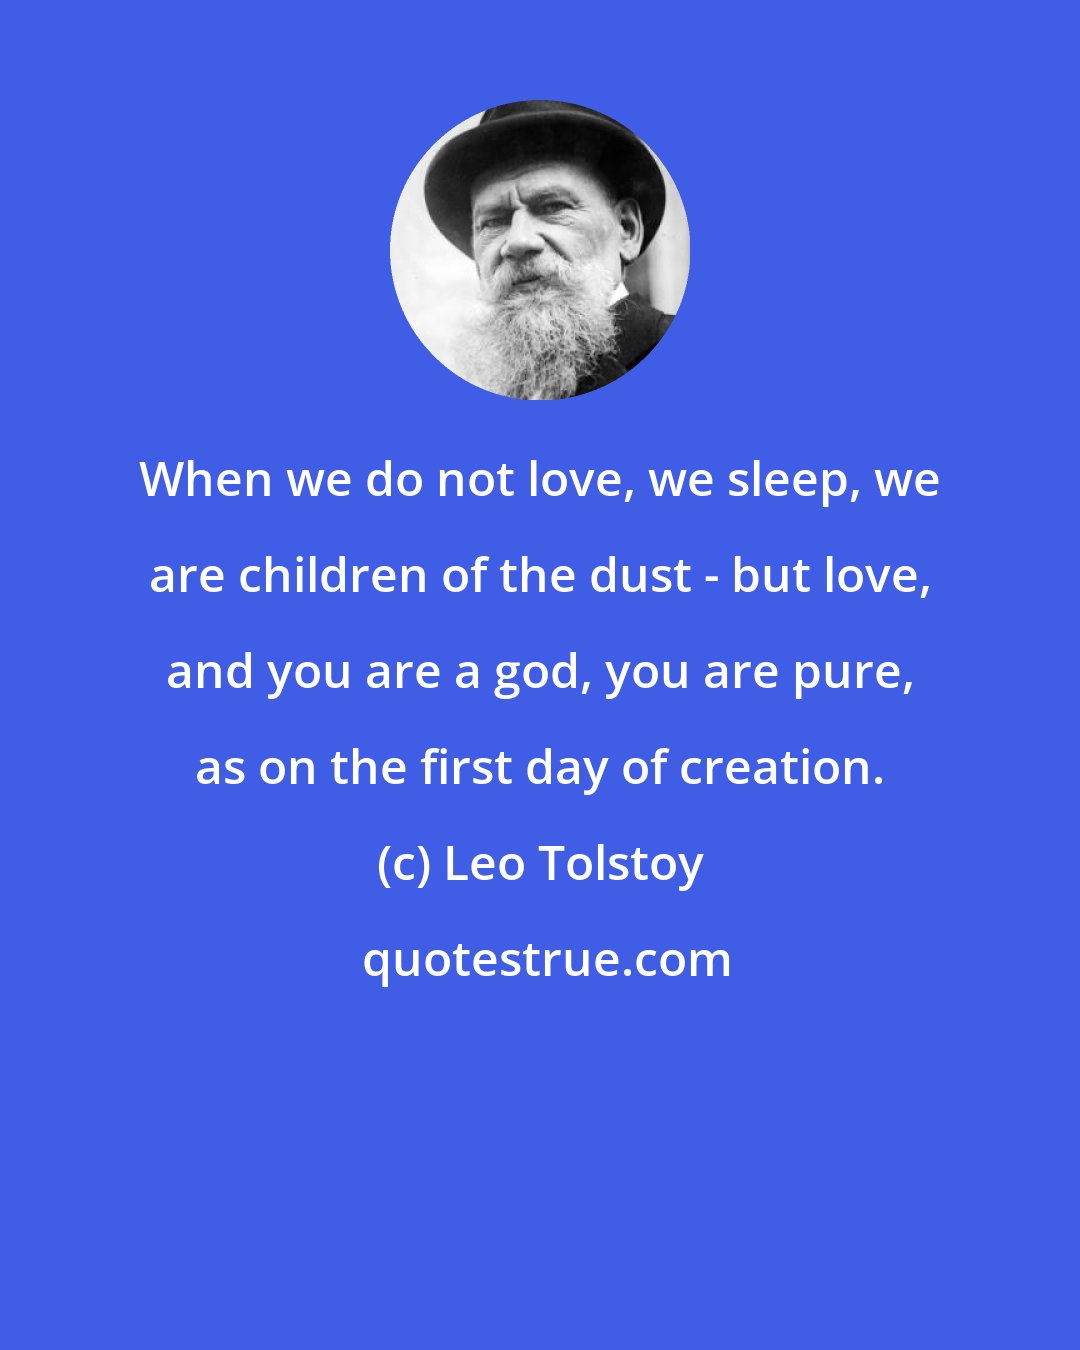 Leo Tolstoy: When we do not love, we sleep, we are children of the dust - but love, and you are a god, you are pure, as on the first day of creation.